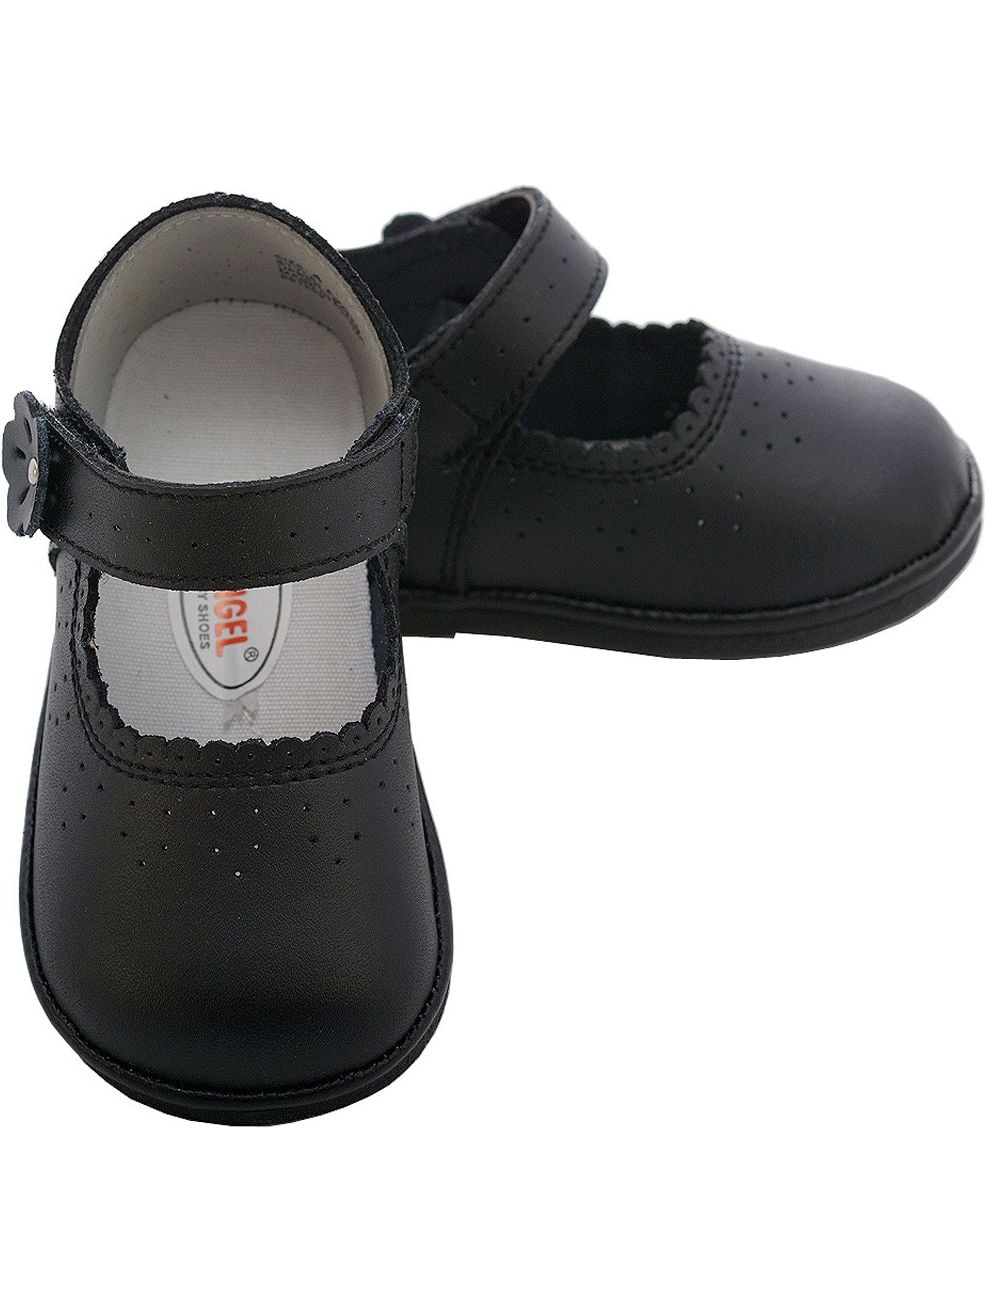 mary jane shoes for boys